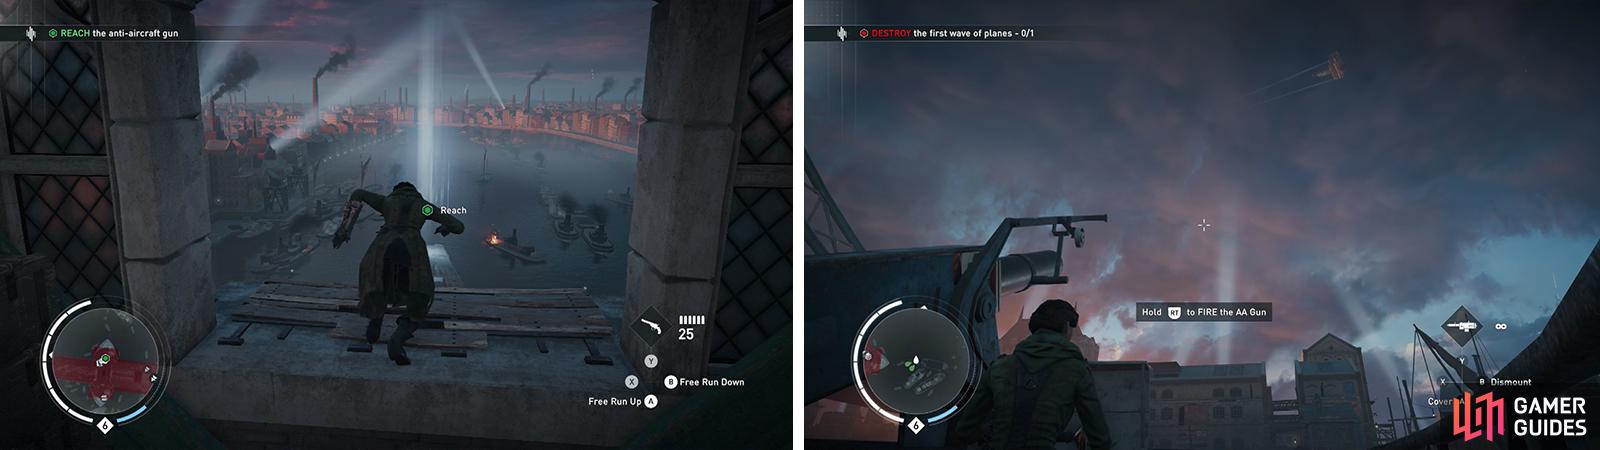 Exit the tower and dive down to the ships below (left). Hop on one of the guns and shoot down the planes as they fly overhead (right).